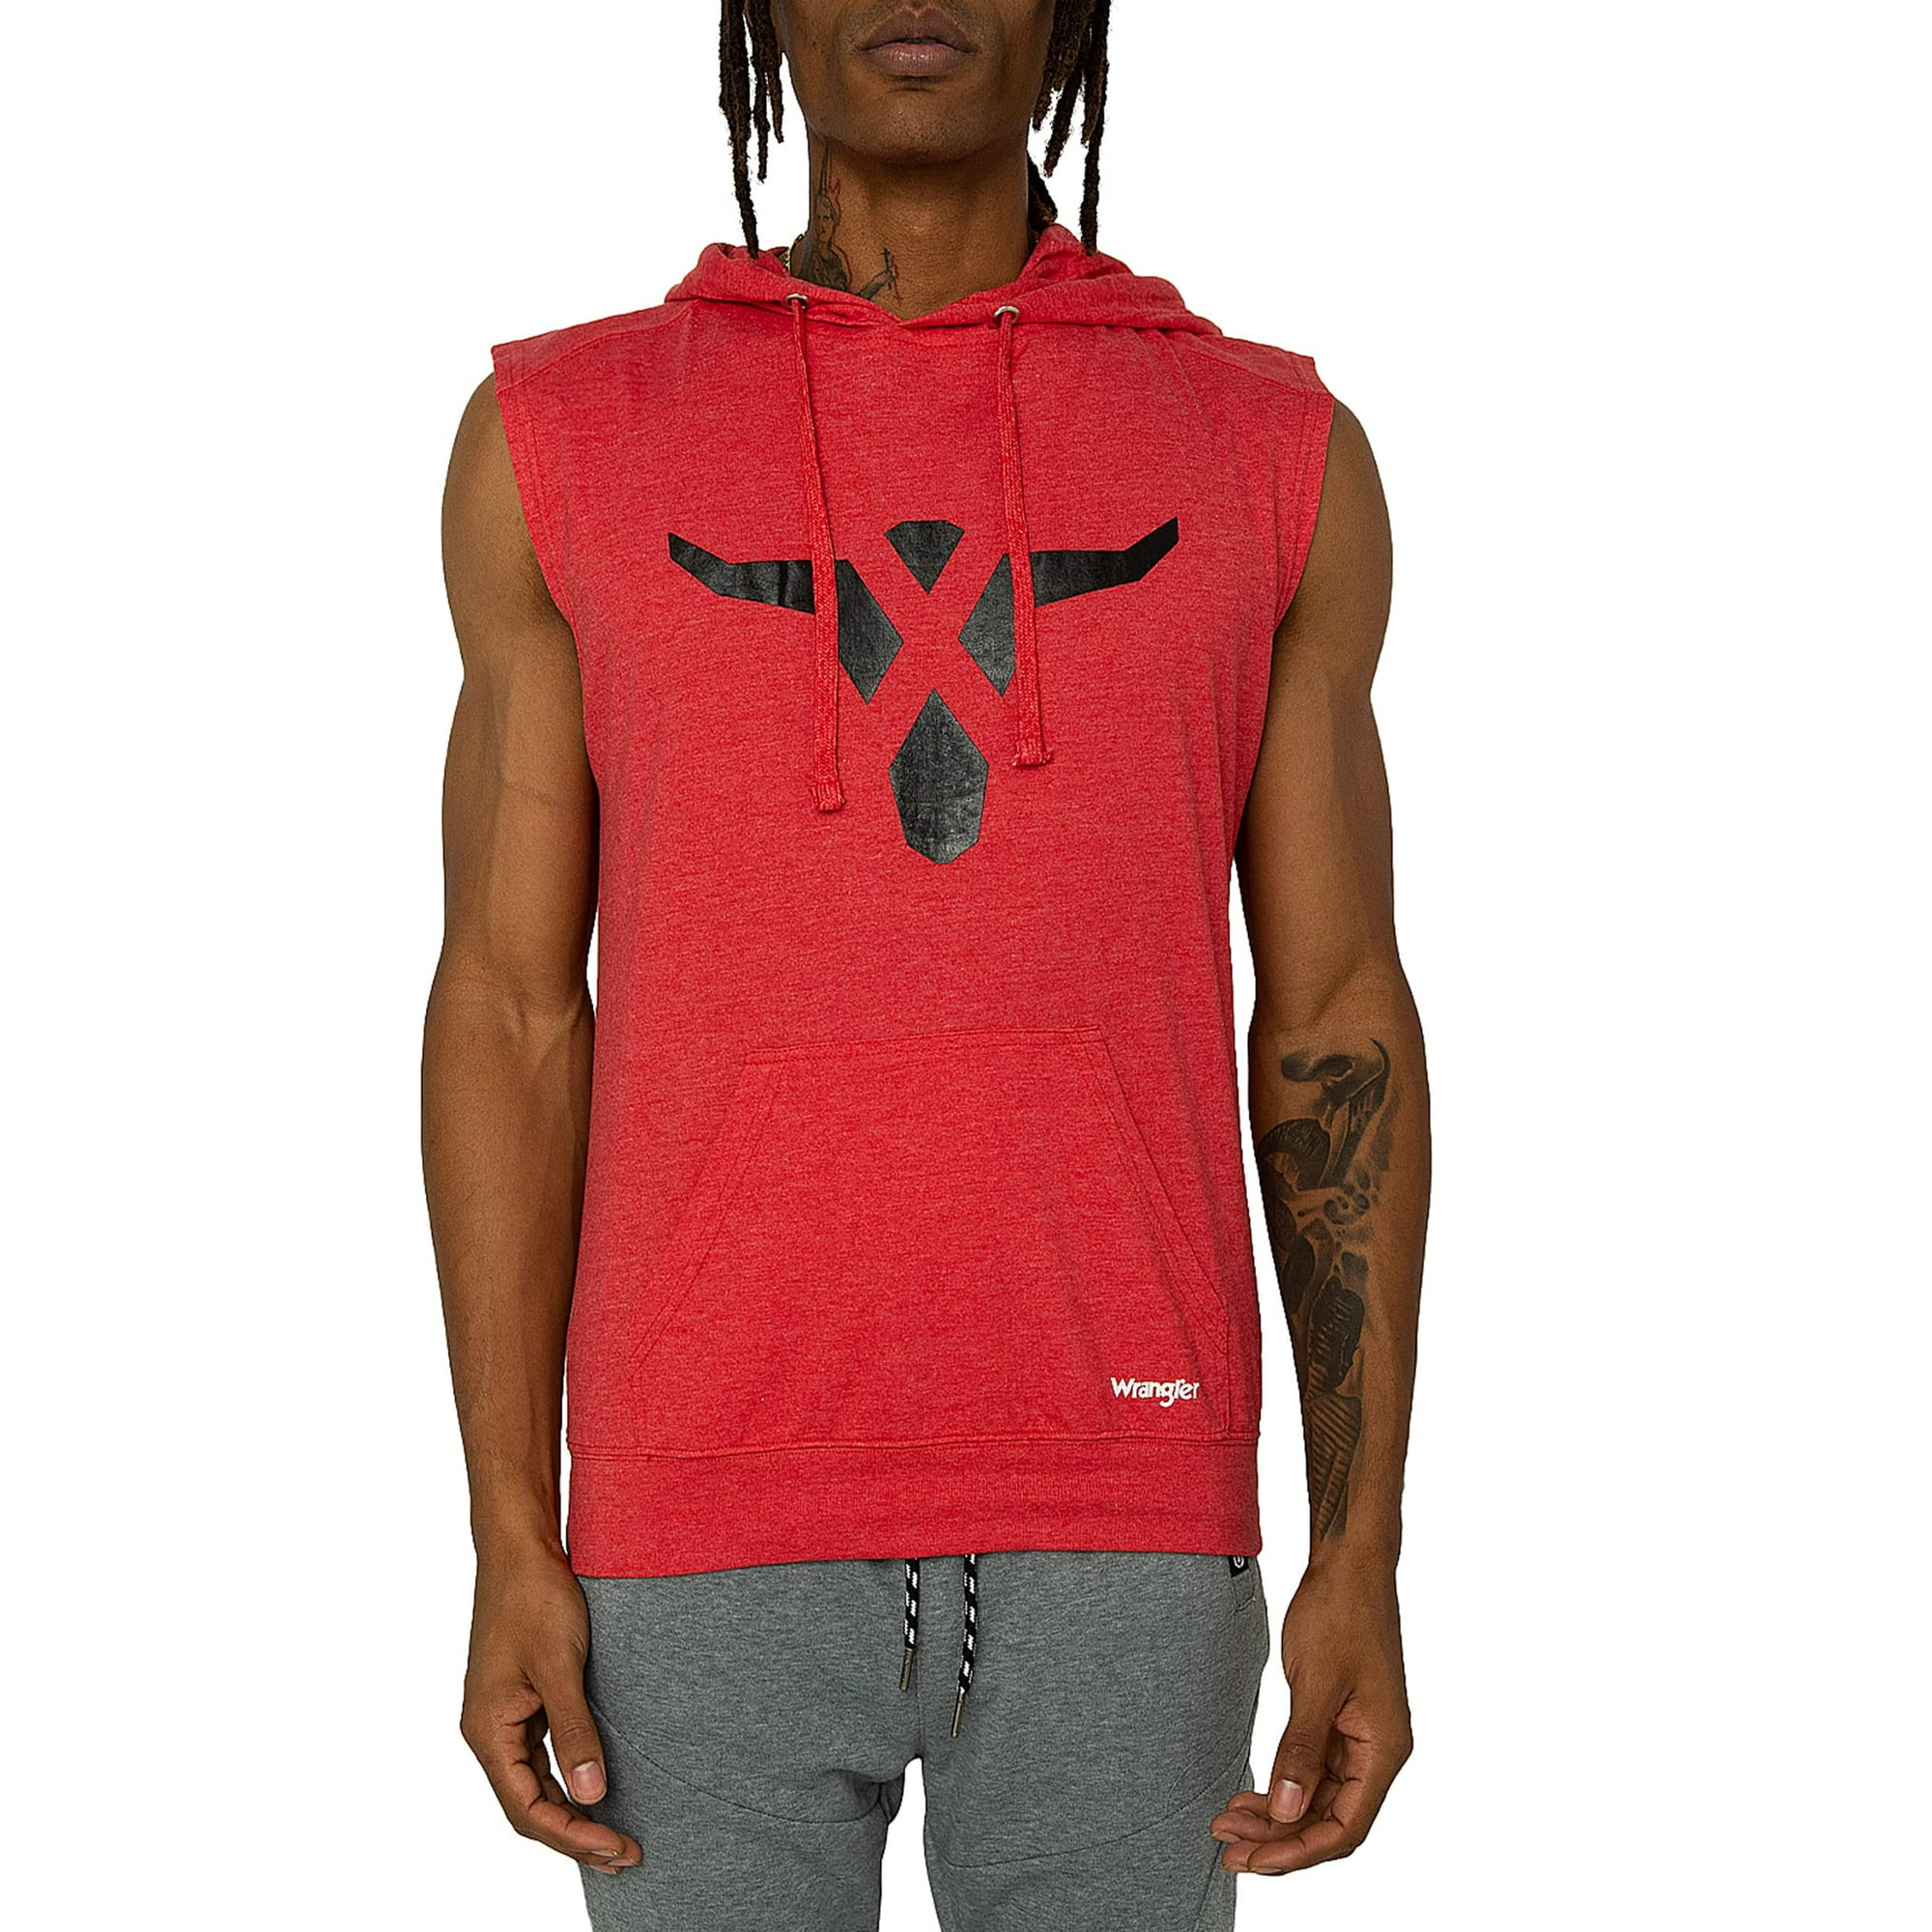 Wrangler Hooded Muscle Shirts for Men, Weightlifting and Workout Tank Top  Red | Walmart Canada